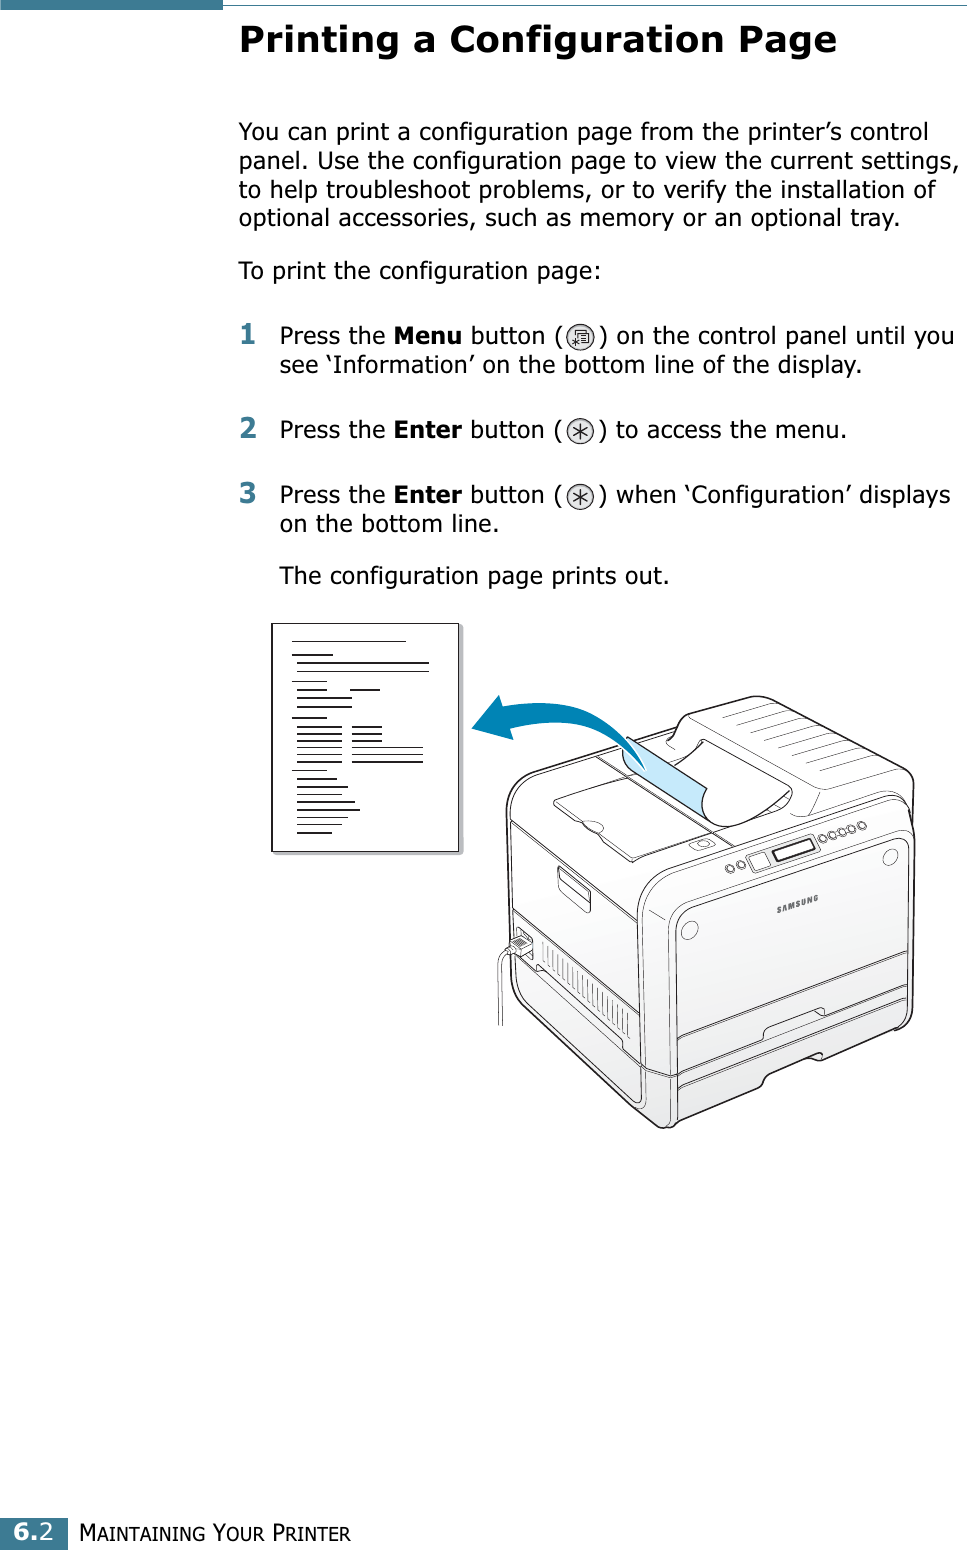 MAINTAINING YOUR PRINTER6.2Printing a Configuration PageYou can print a configuration page from the printer’s control panel. Use the configuration page to view the current settings, to help troubleshoot problems, or to verify the installation of optional accessories, such as memory or an optional tray. To print the configuration page:1Press the Menu button ( ) on the control panel until you see ‘Information’ on the bottom line of the display.2Press the Enter button ( ) to access the menu.3Press the Enter button ( ) when ‘Configuration’ displays on the bottom line.The configuration page prints out. 